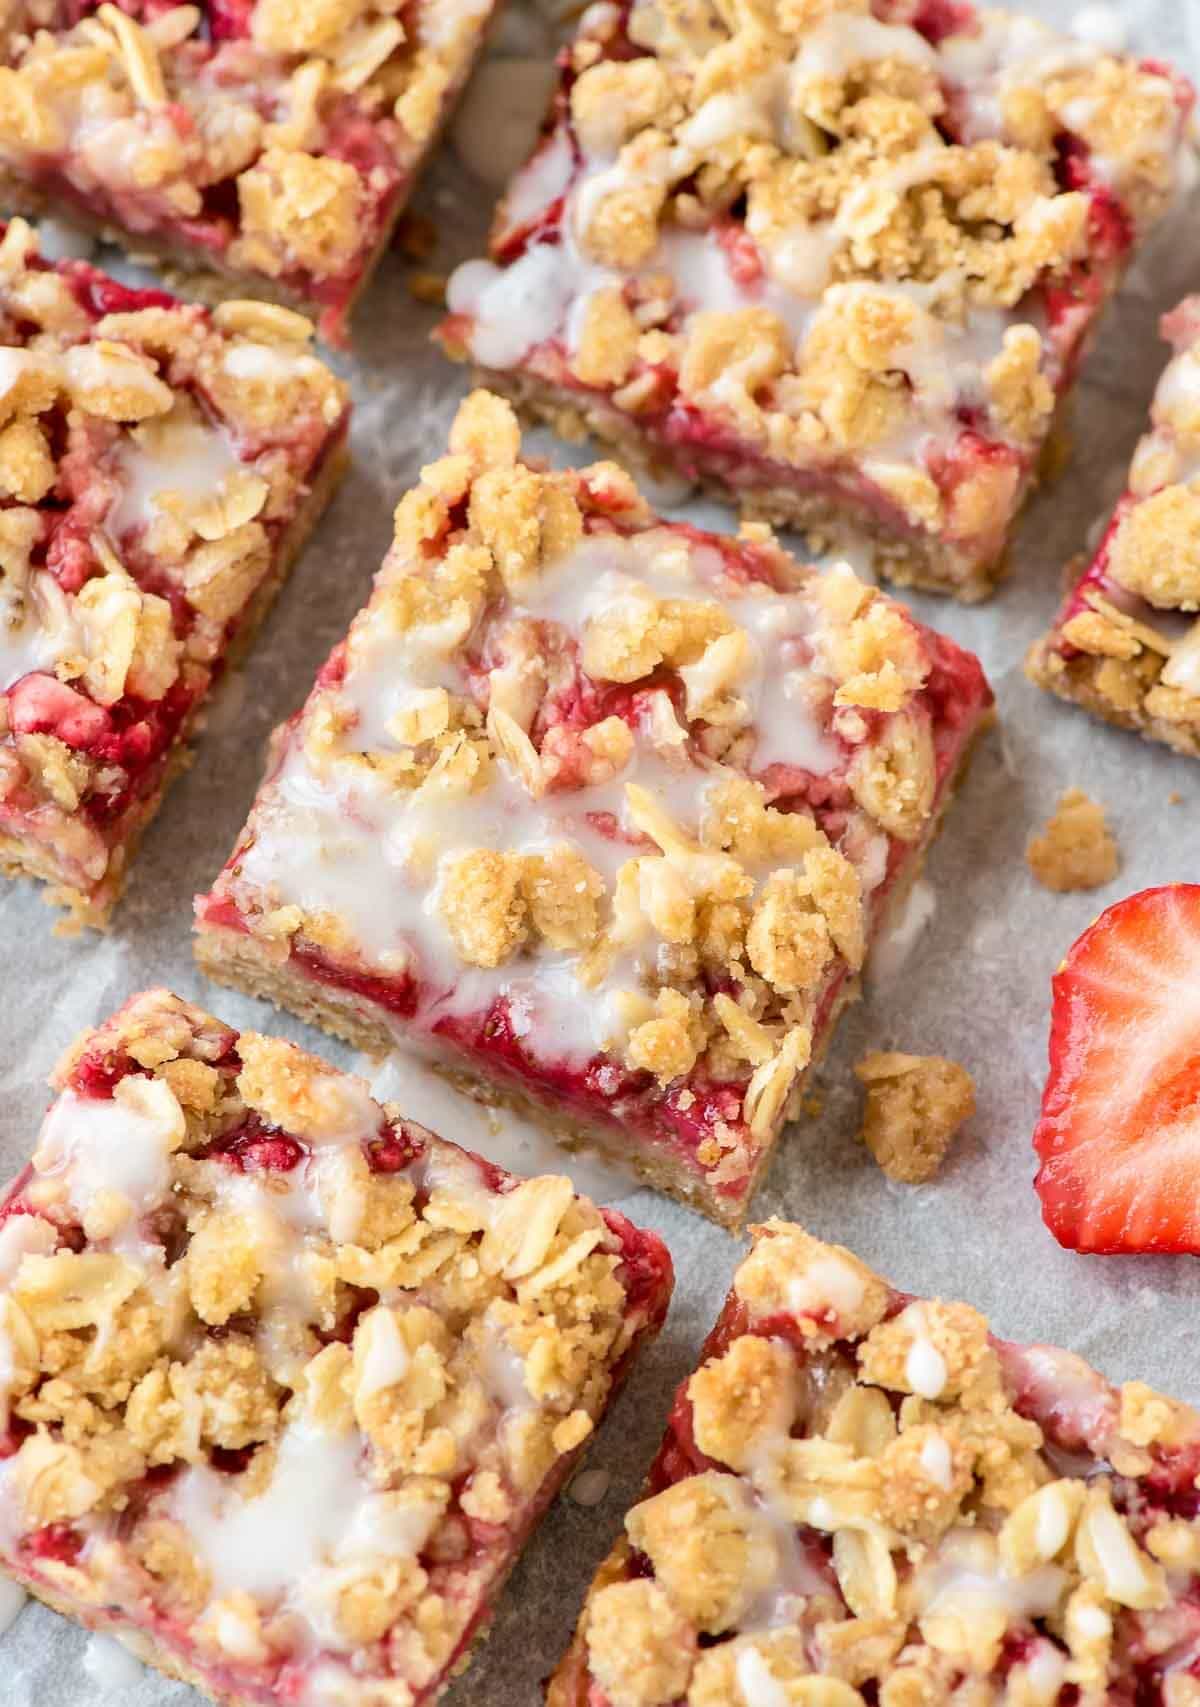  These easy Strawberry Oatmeal Bars, with a buttery crust, fresh strawberry filling, and sweet vanilla glaze make wonderful dessert bars to take to a party or potluck. Made with 100% whole grains, they healthy enough for an afternoon snack but sweet enough for dessert! @wellplated